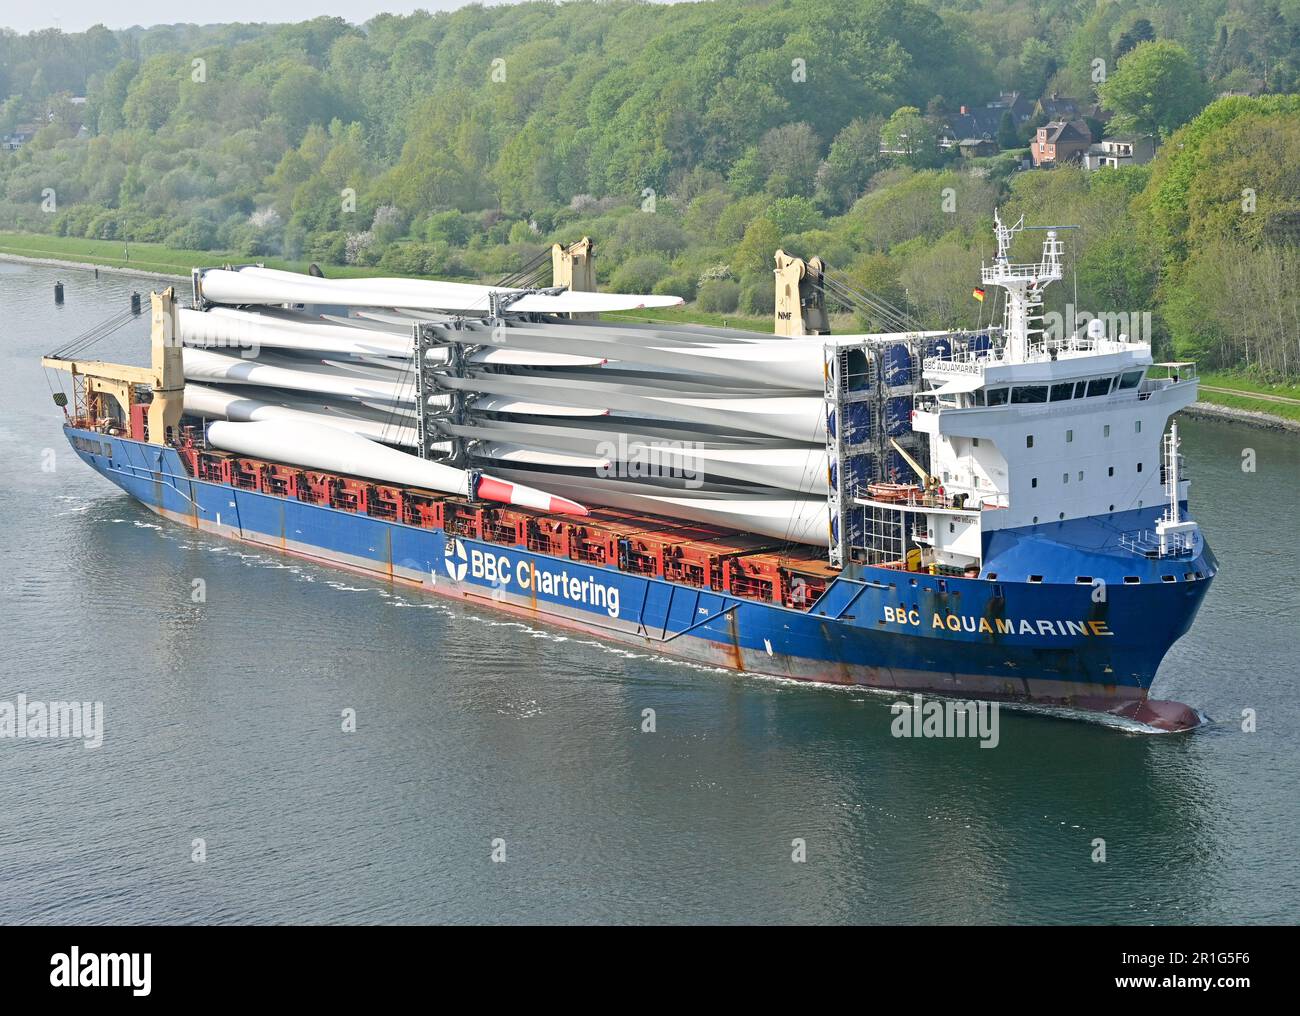 General Cargo Ship BBC AQUAMARINE passing the Kiel Canal with a load of wind energy blades on deck. Stock Photo